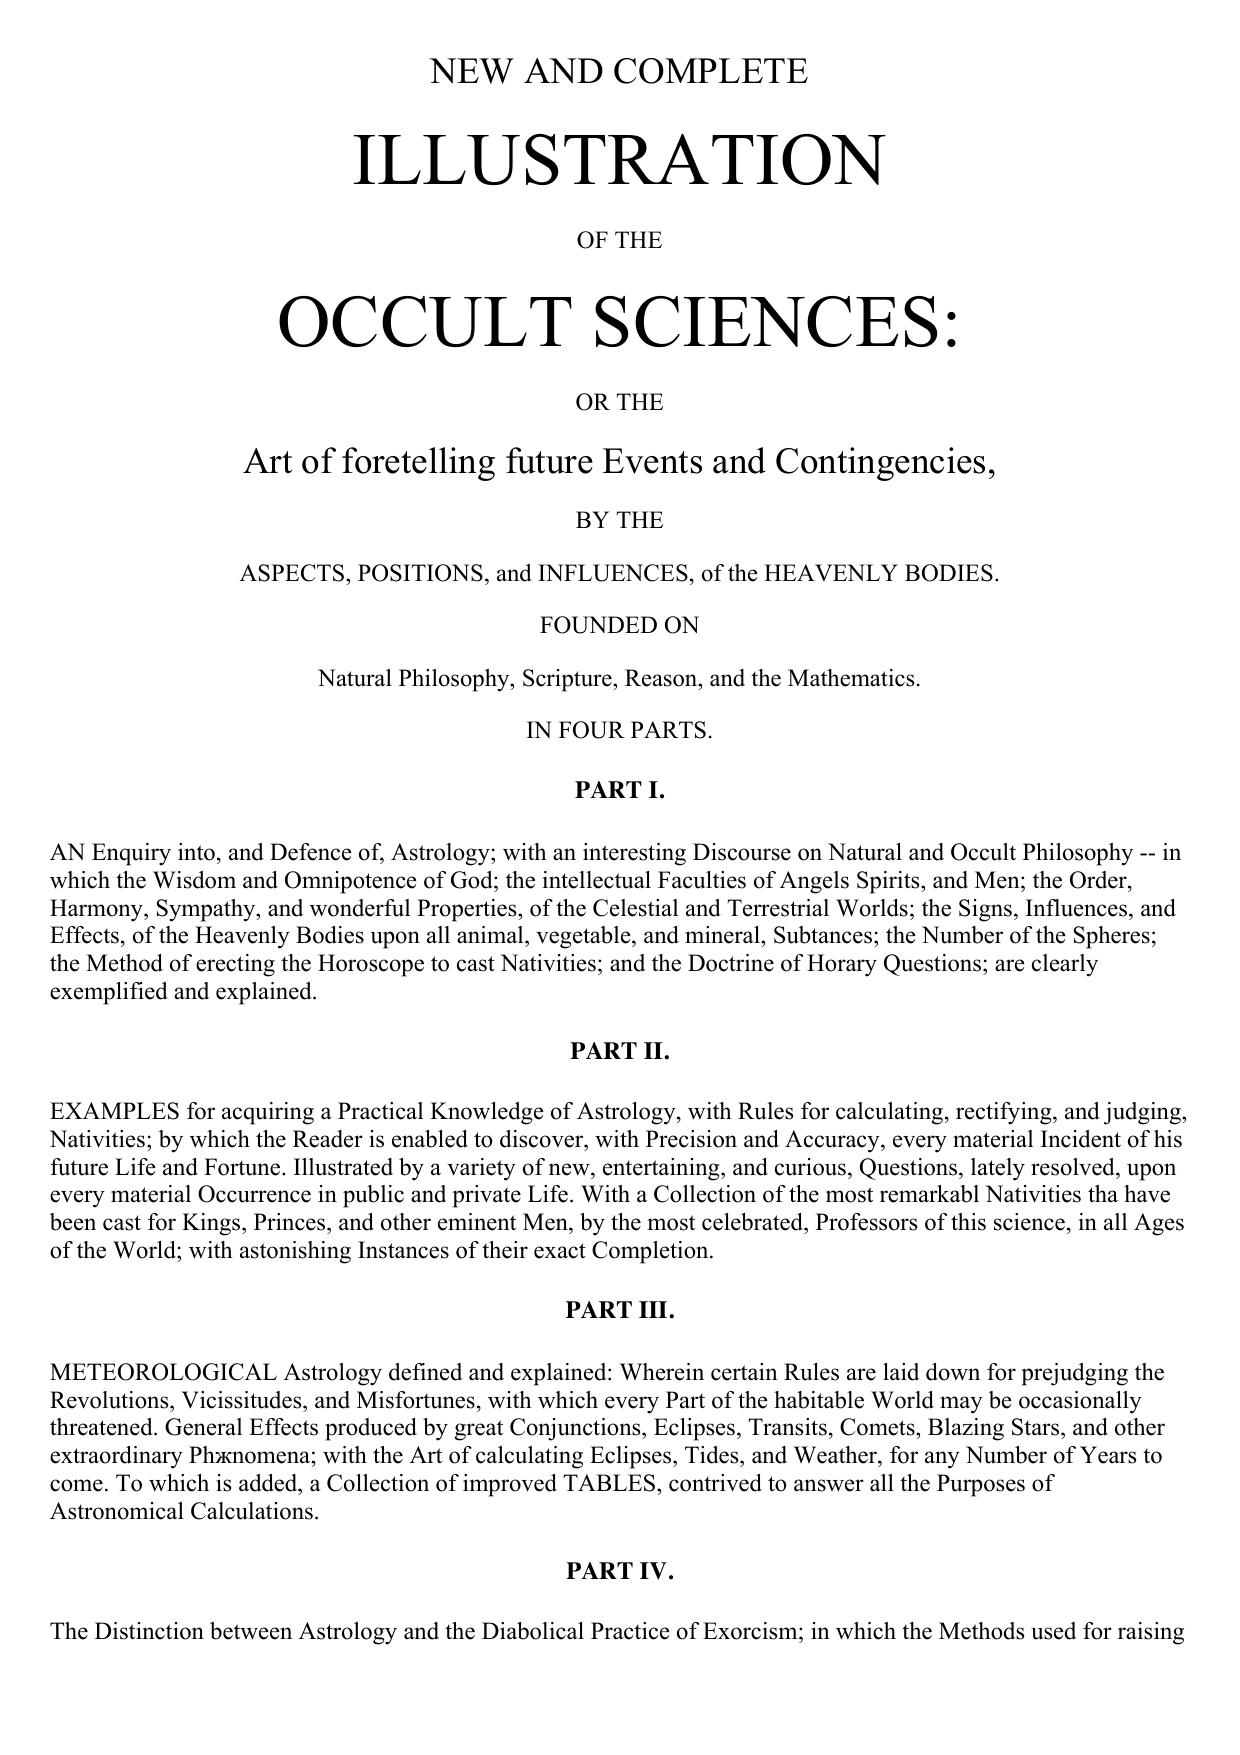 A New and Complete Illustration of the Occult Sciences: Or, the Art of Foretelling Future Events and Contingencies, Volume 1